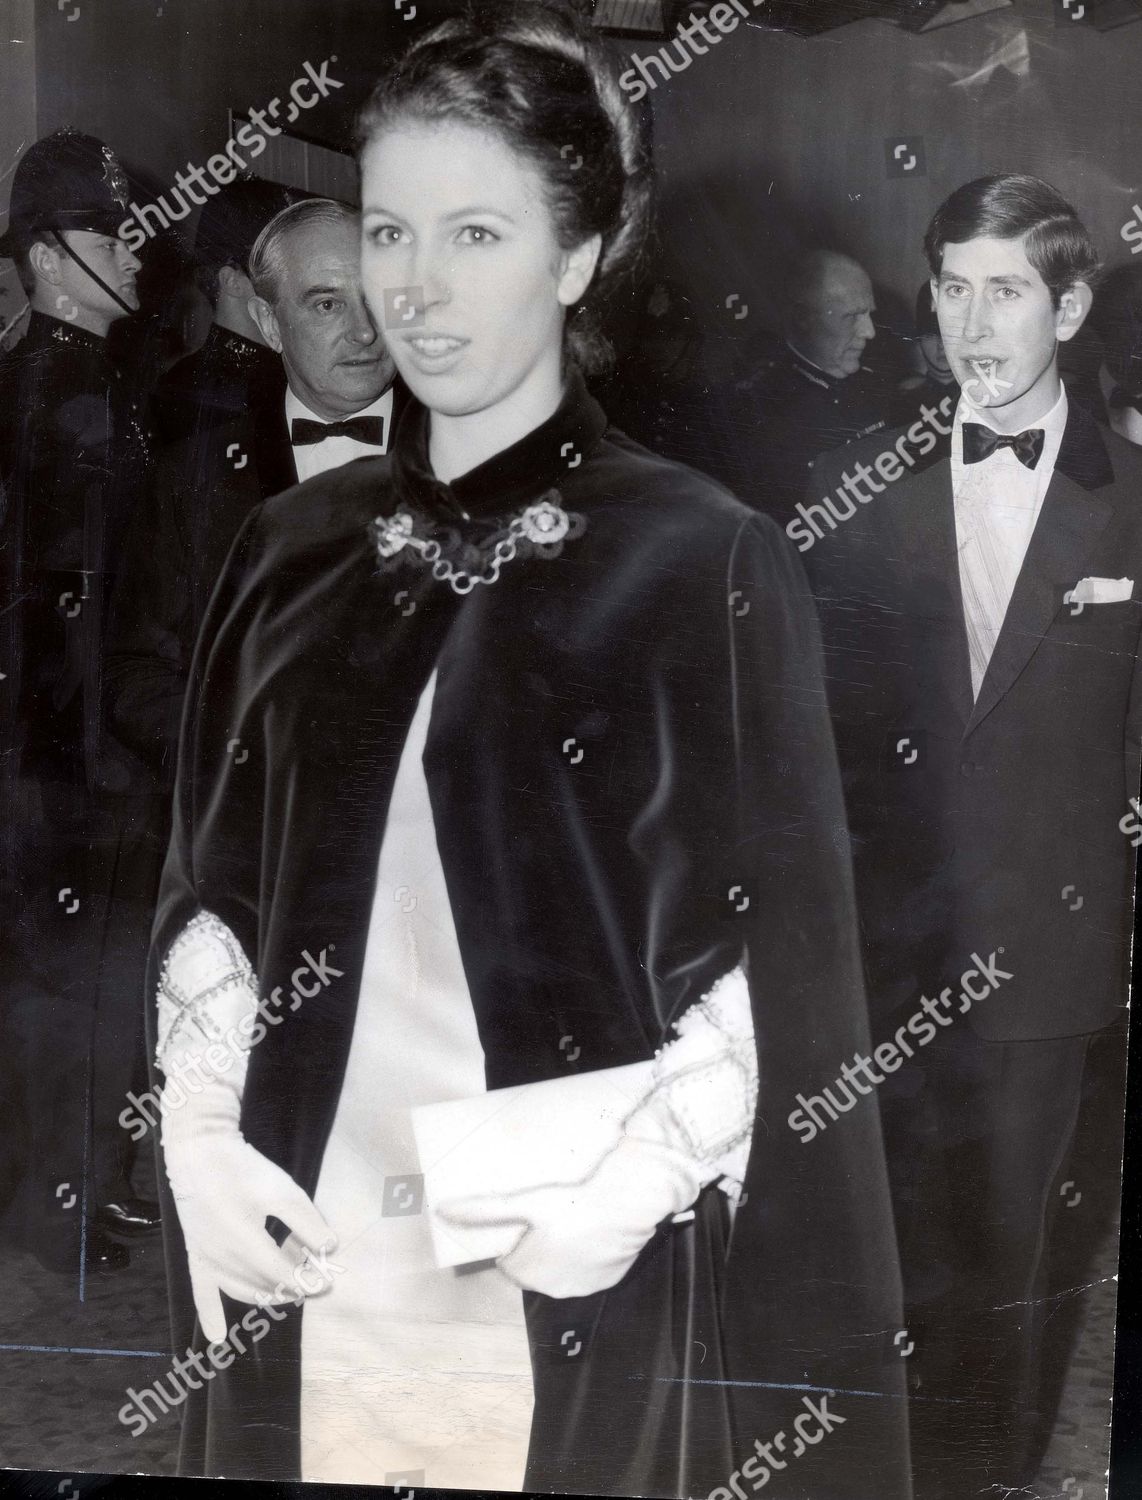 princess-anne-now-princess-royal-1968-picture-shows-princess-anne-wearing-a-velvet-cloak-when-she-arrived-for-the-world-premiere-of-the-film-chitty-chitty-bang-bang-in-london-she-was-accompanying-the-queen-prince-philip-and-prince-charles-fo-shutterstock-editorial-896279a.jpg